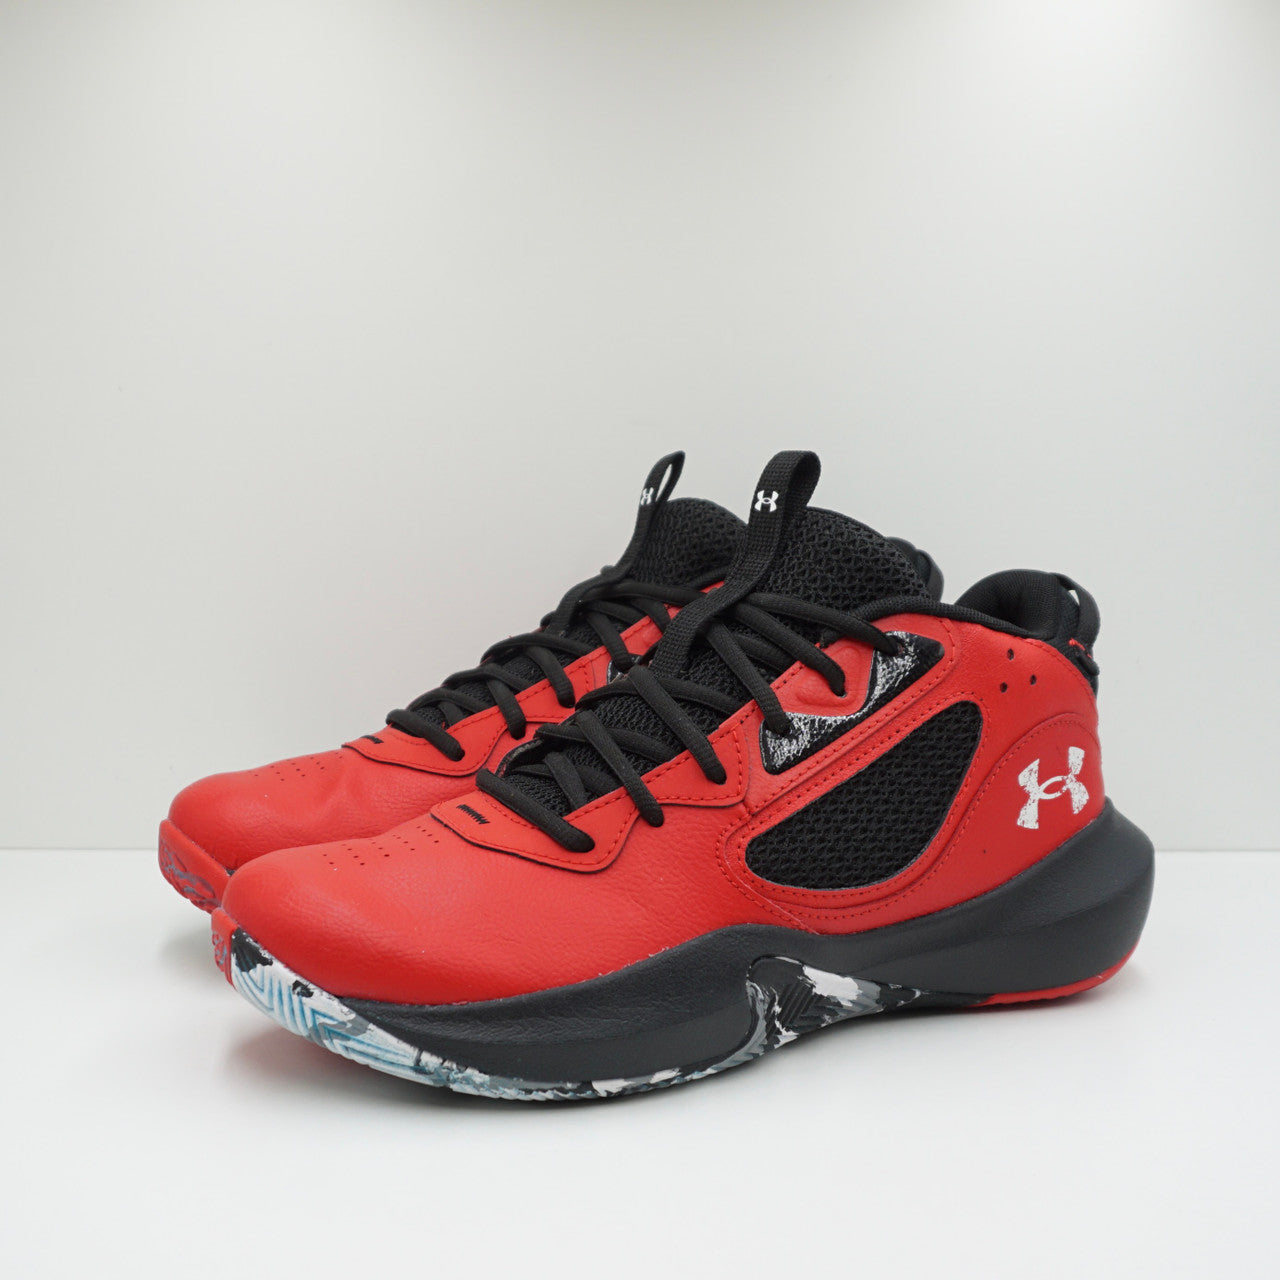 2023 Under Armour Basketball Shoes - UA Lockdown 6